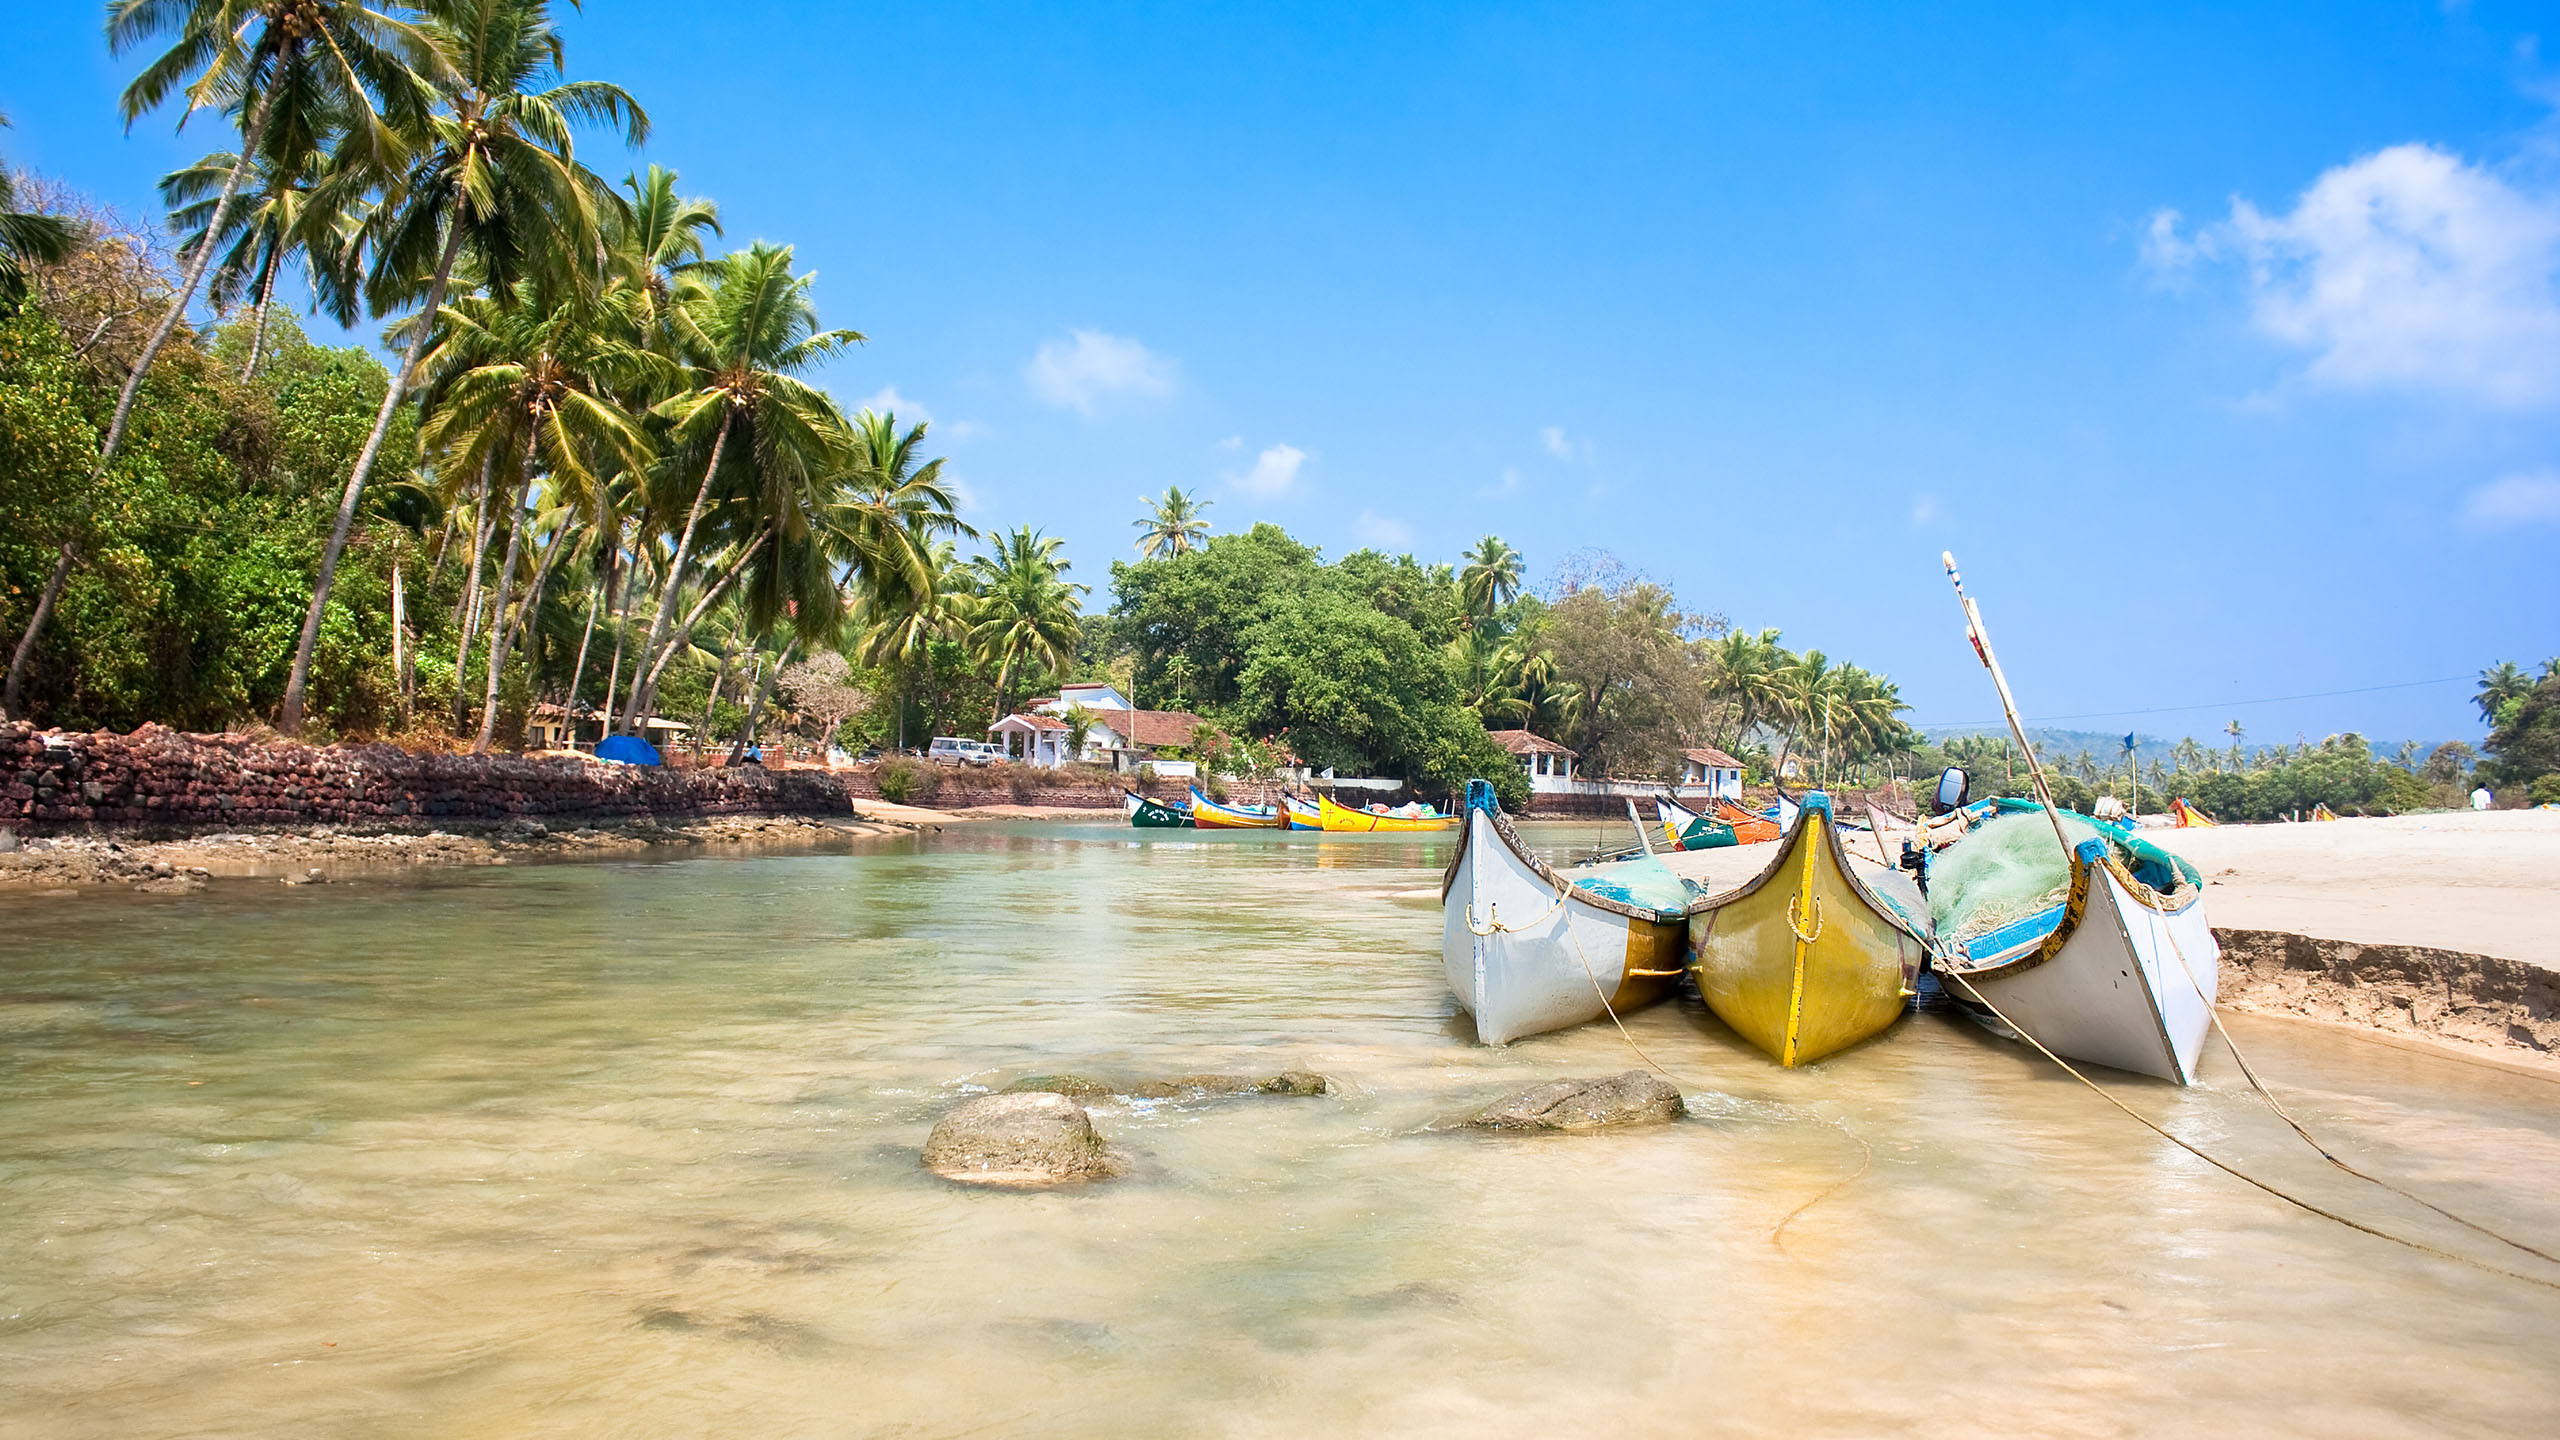 Shopping In Goa: What To Buy During Your Exotic Beachy Getaway